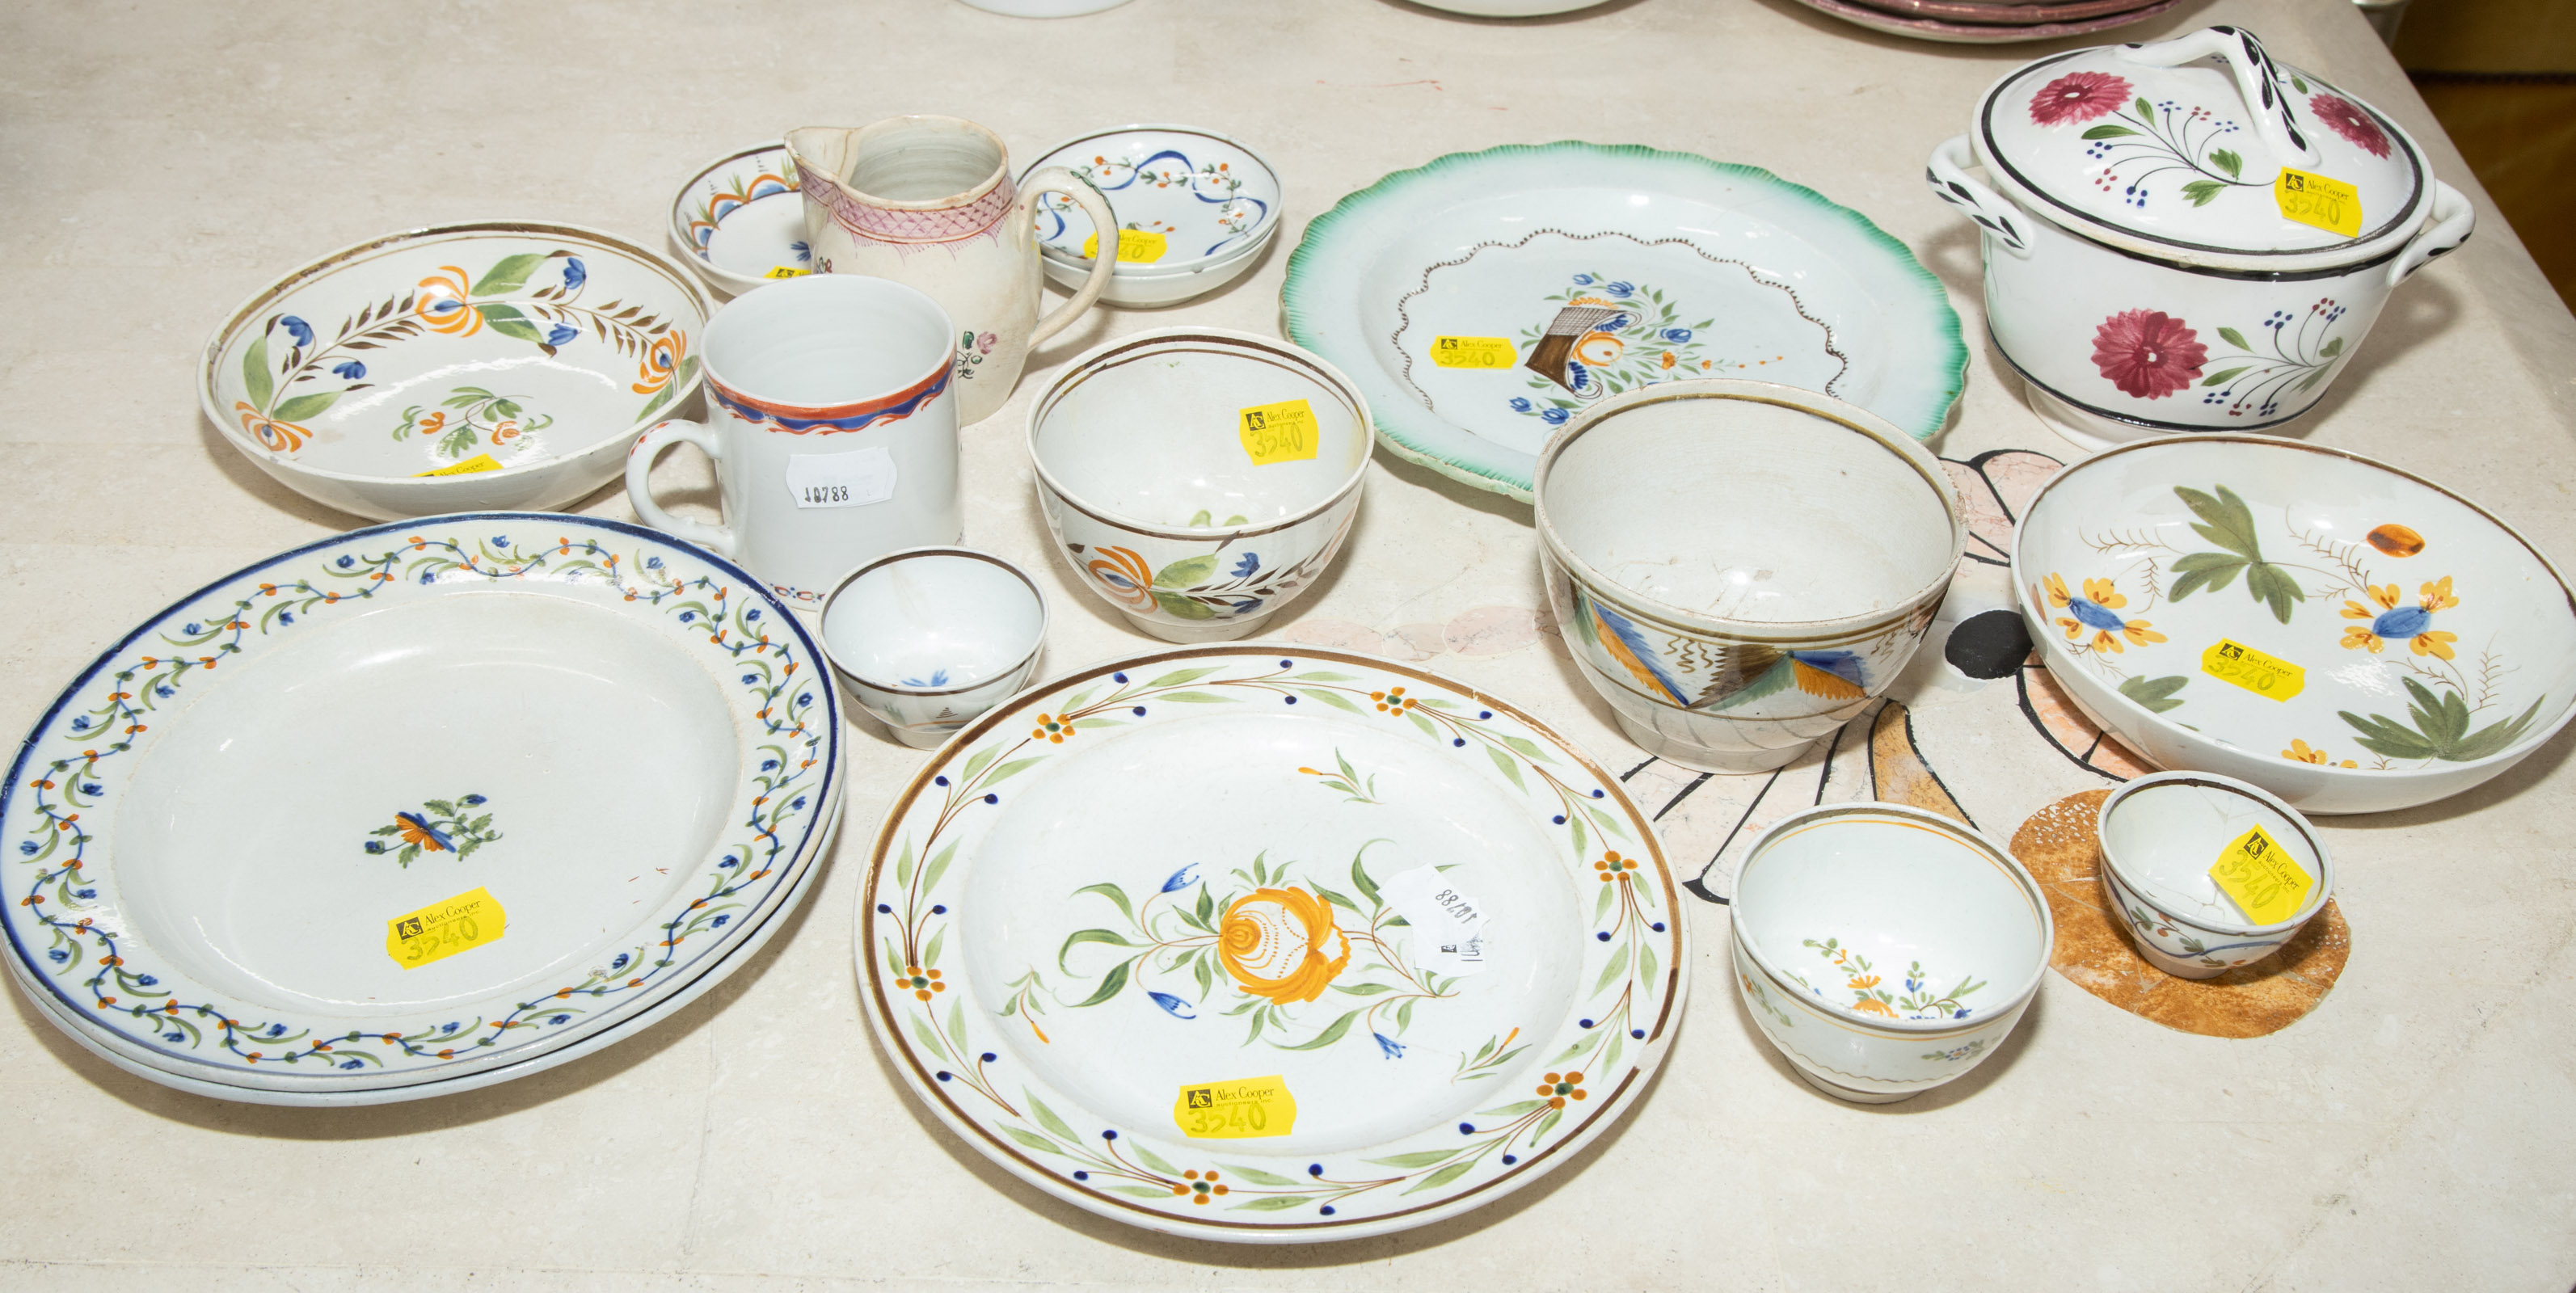 COLLECTION OF STAFFORDSHIRE PEARLWARE 338417